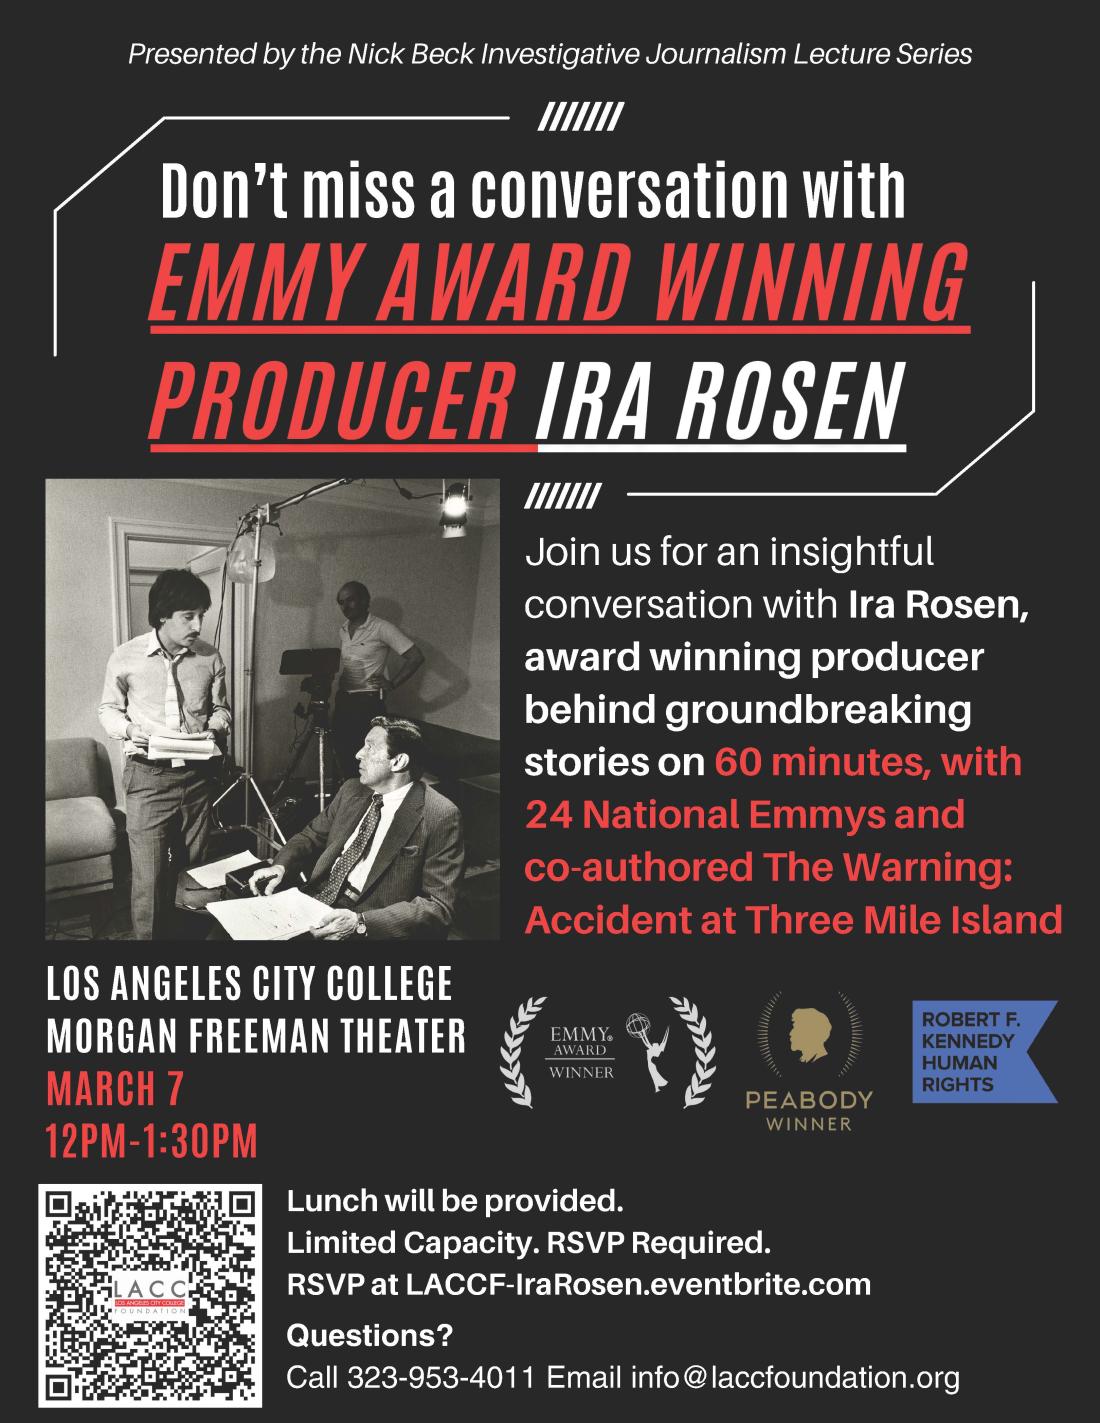 Nick Beck Lecture Series: An Afternoon with Ira Rosen